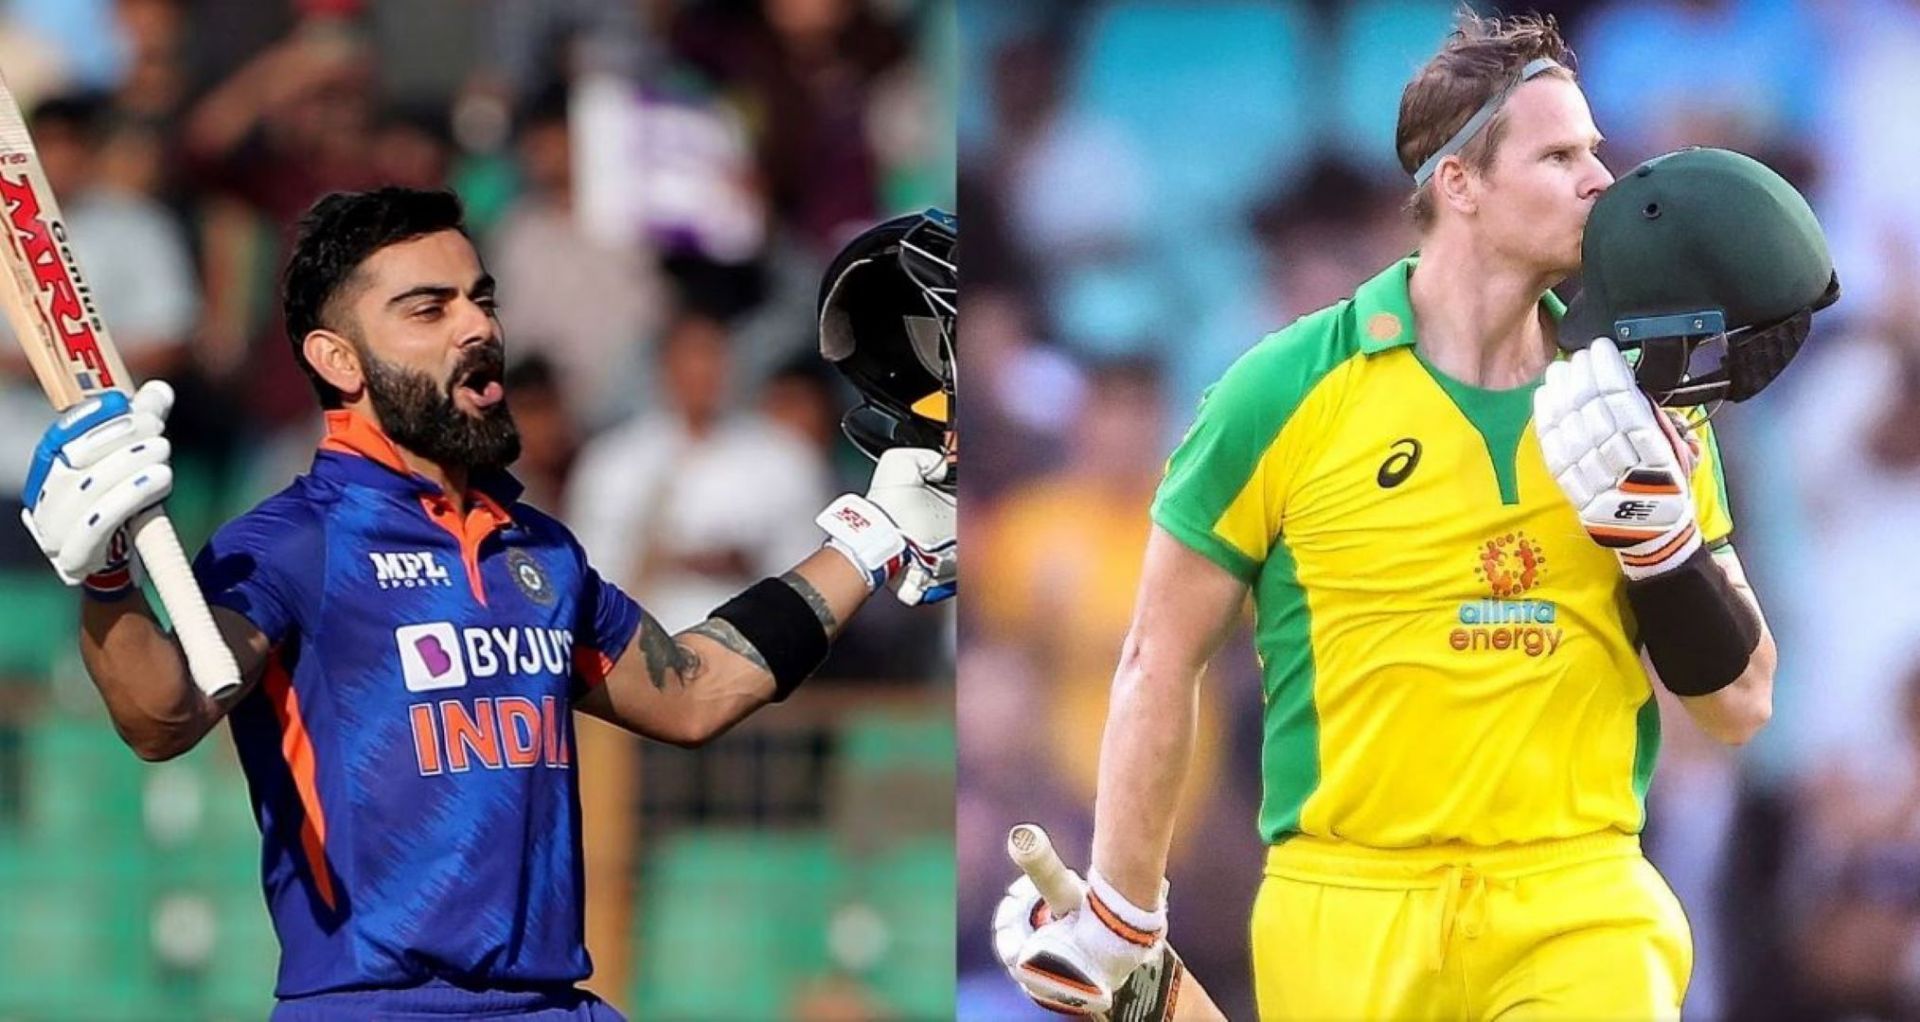 The duo have dominated World Cricket with their willow over the past decade